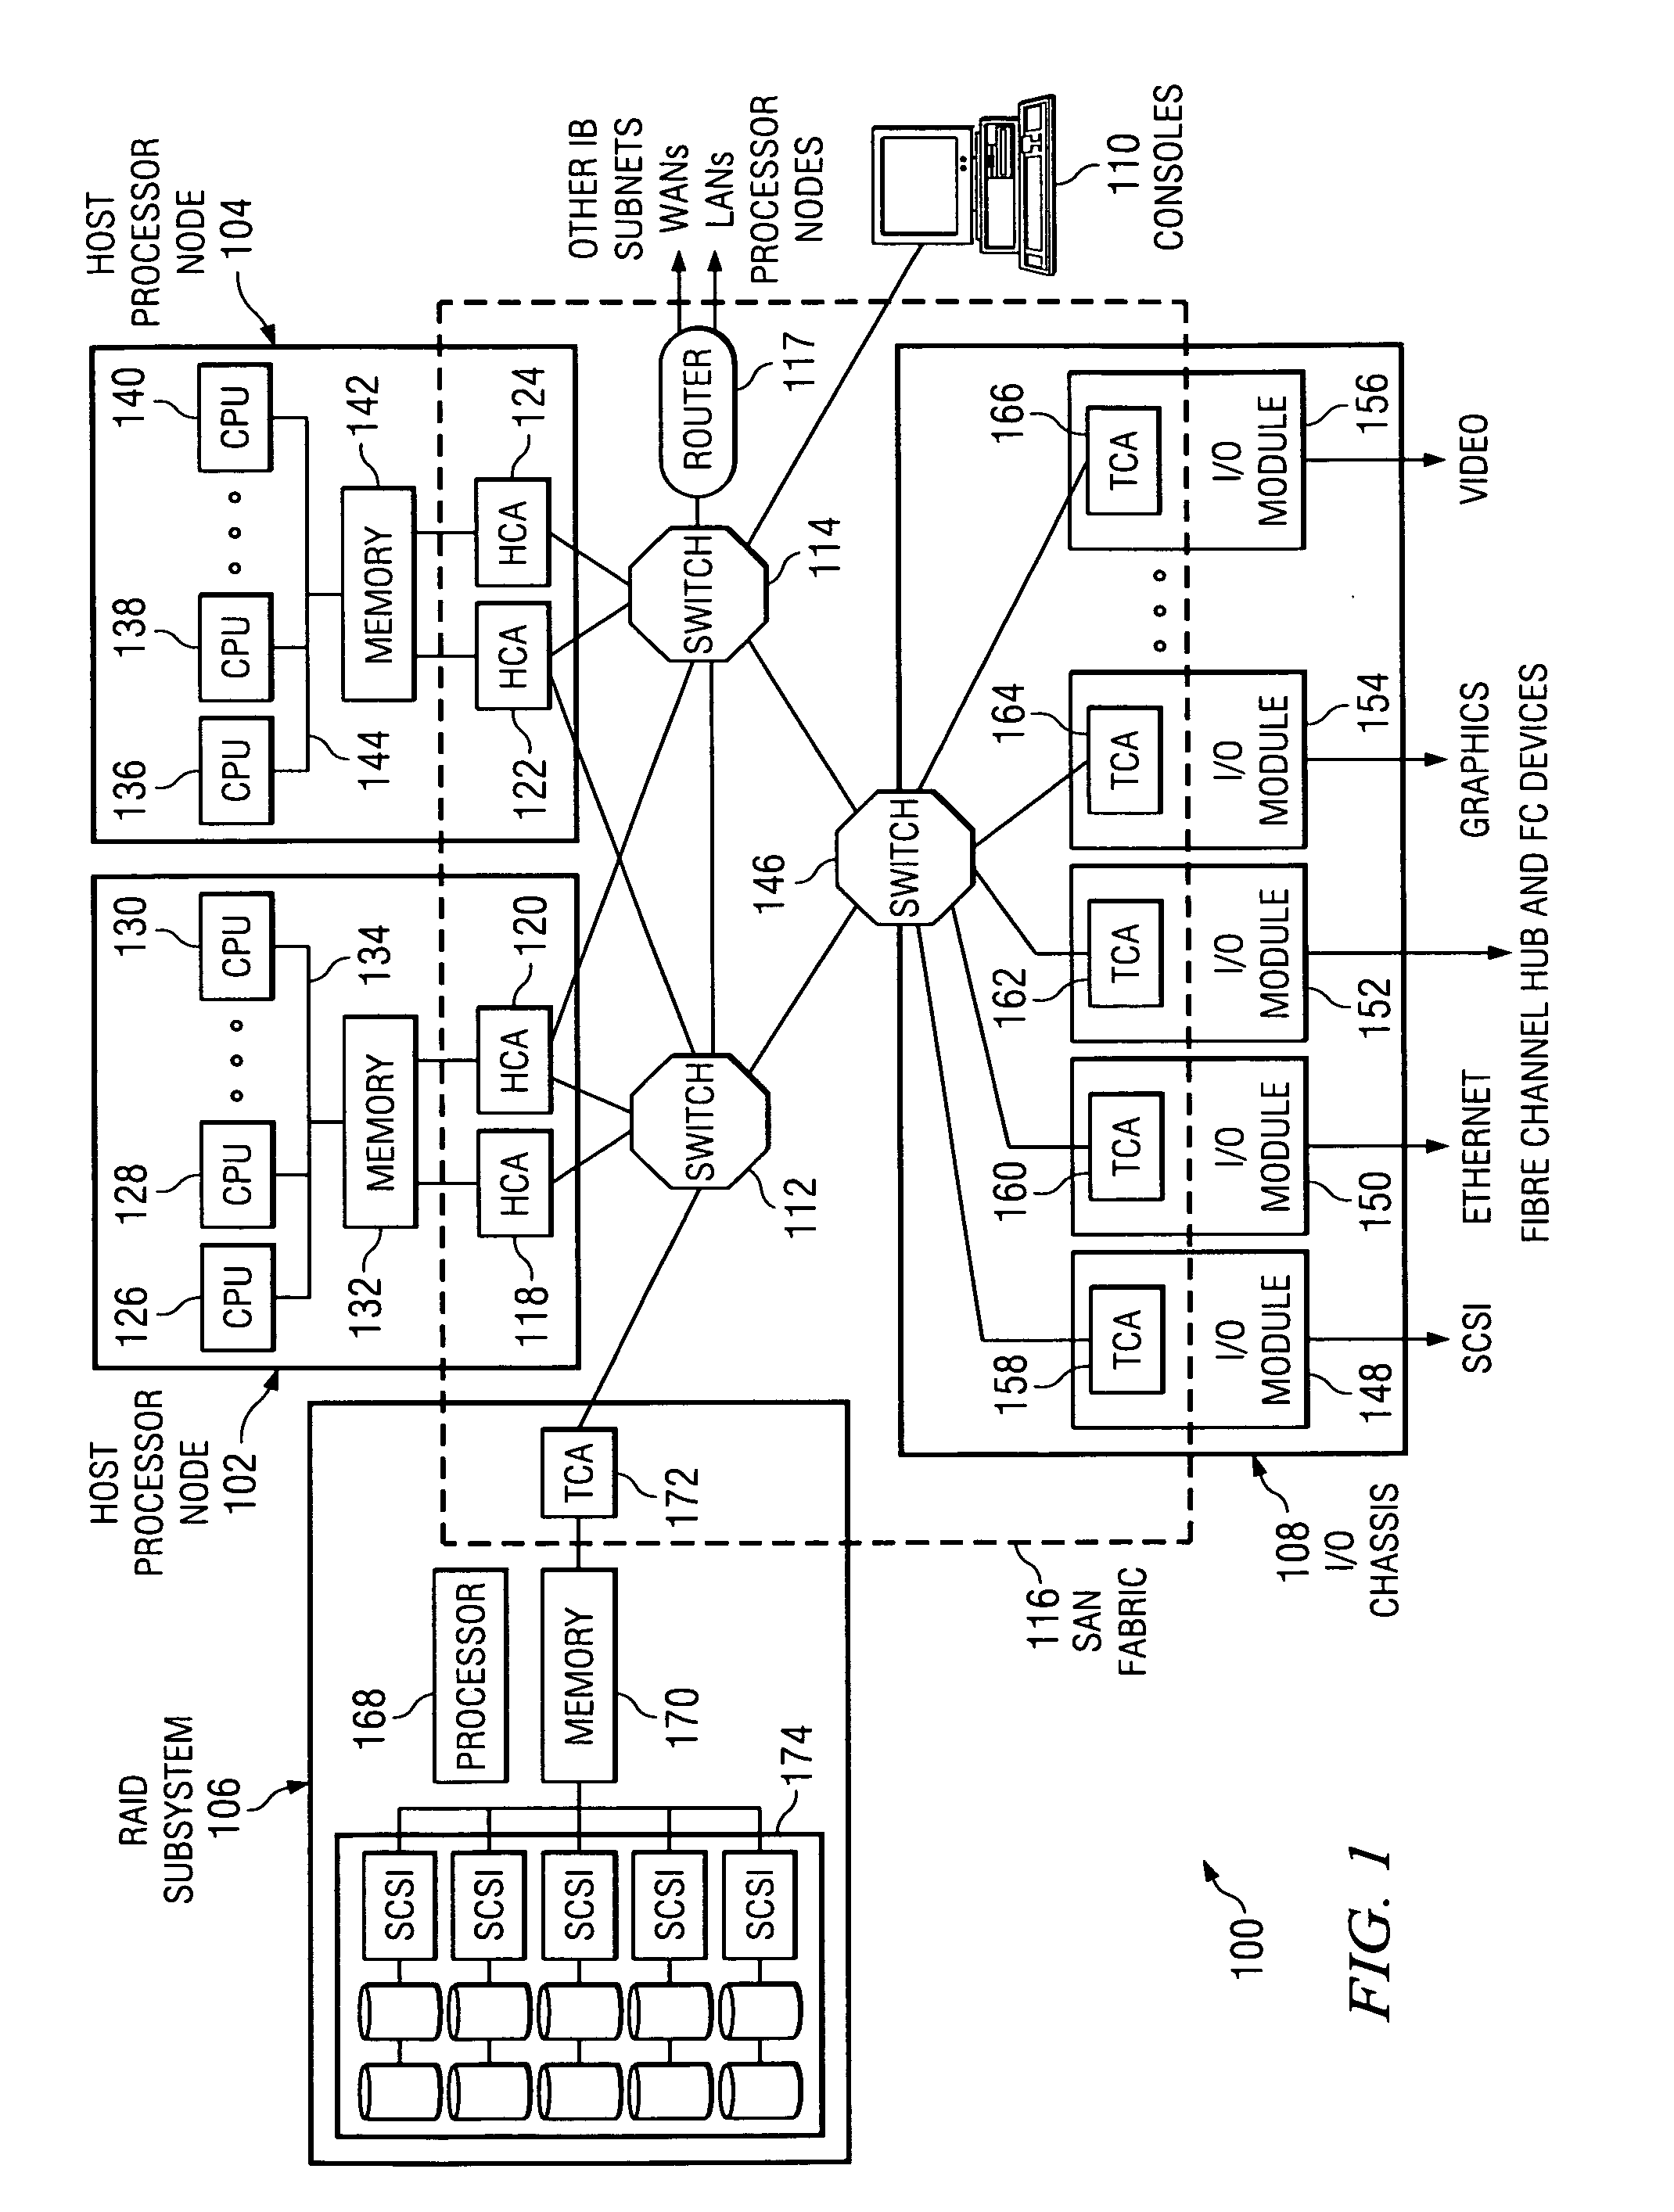 Method and apparatus for efficient determination of memory copy versus registration in direct access environments